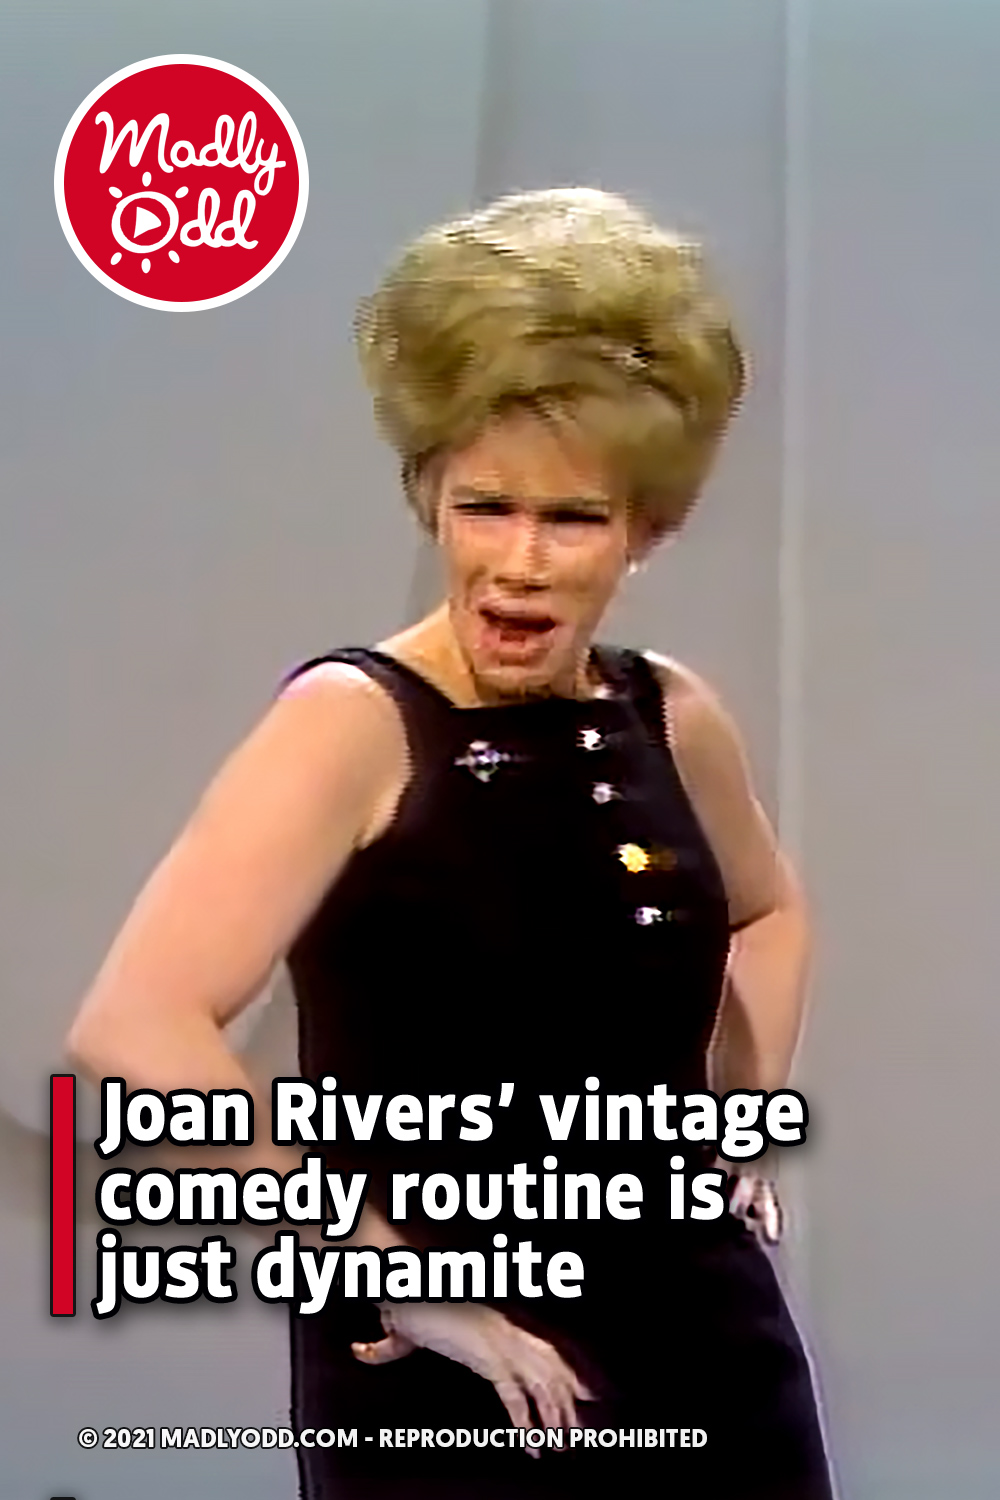 Joan Rivers’ vintage comedy routine is just dynamite